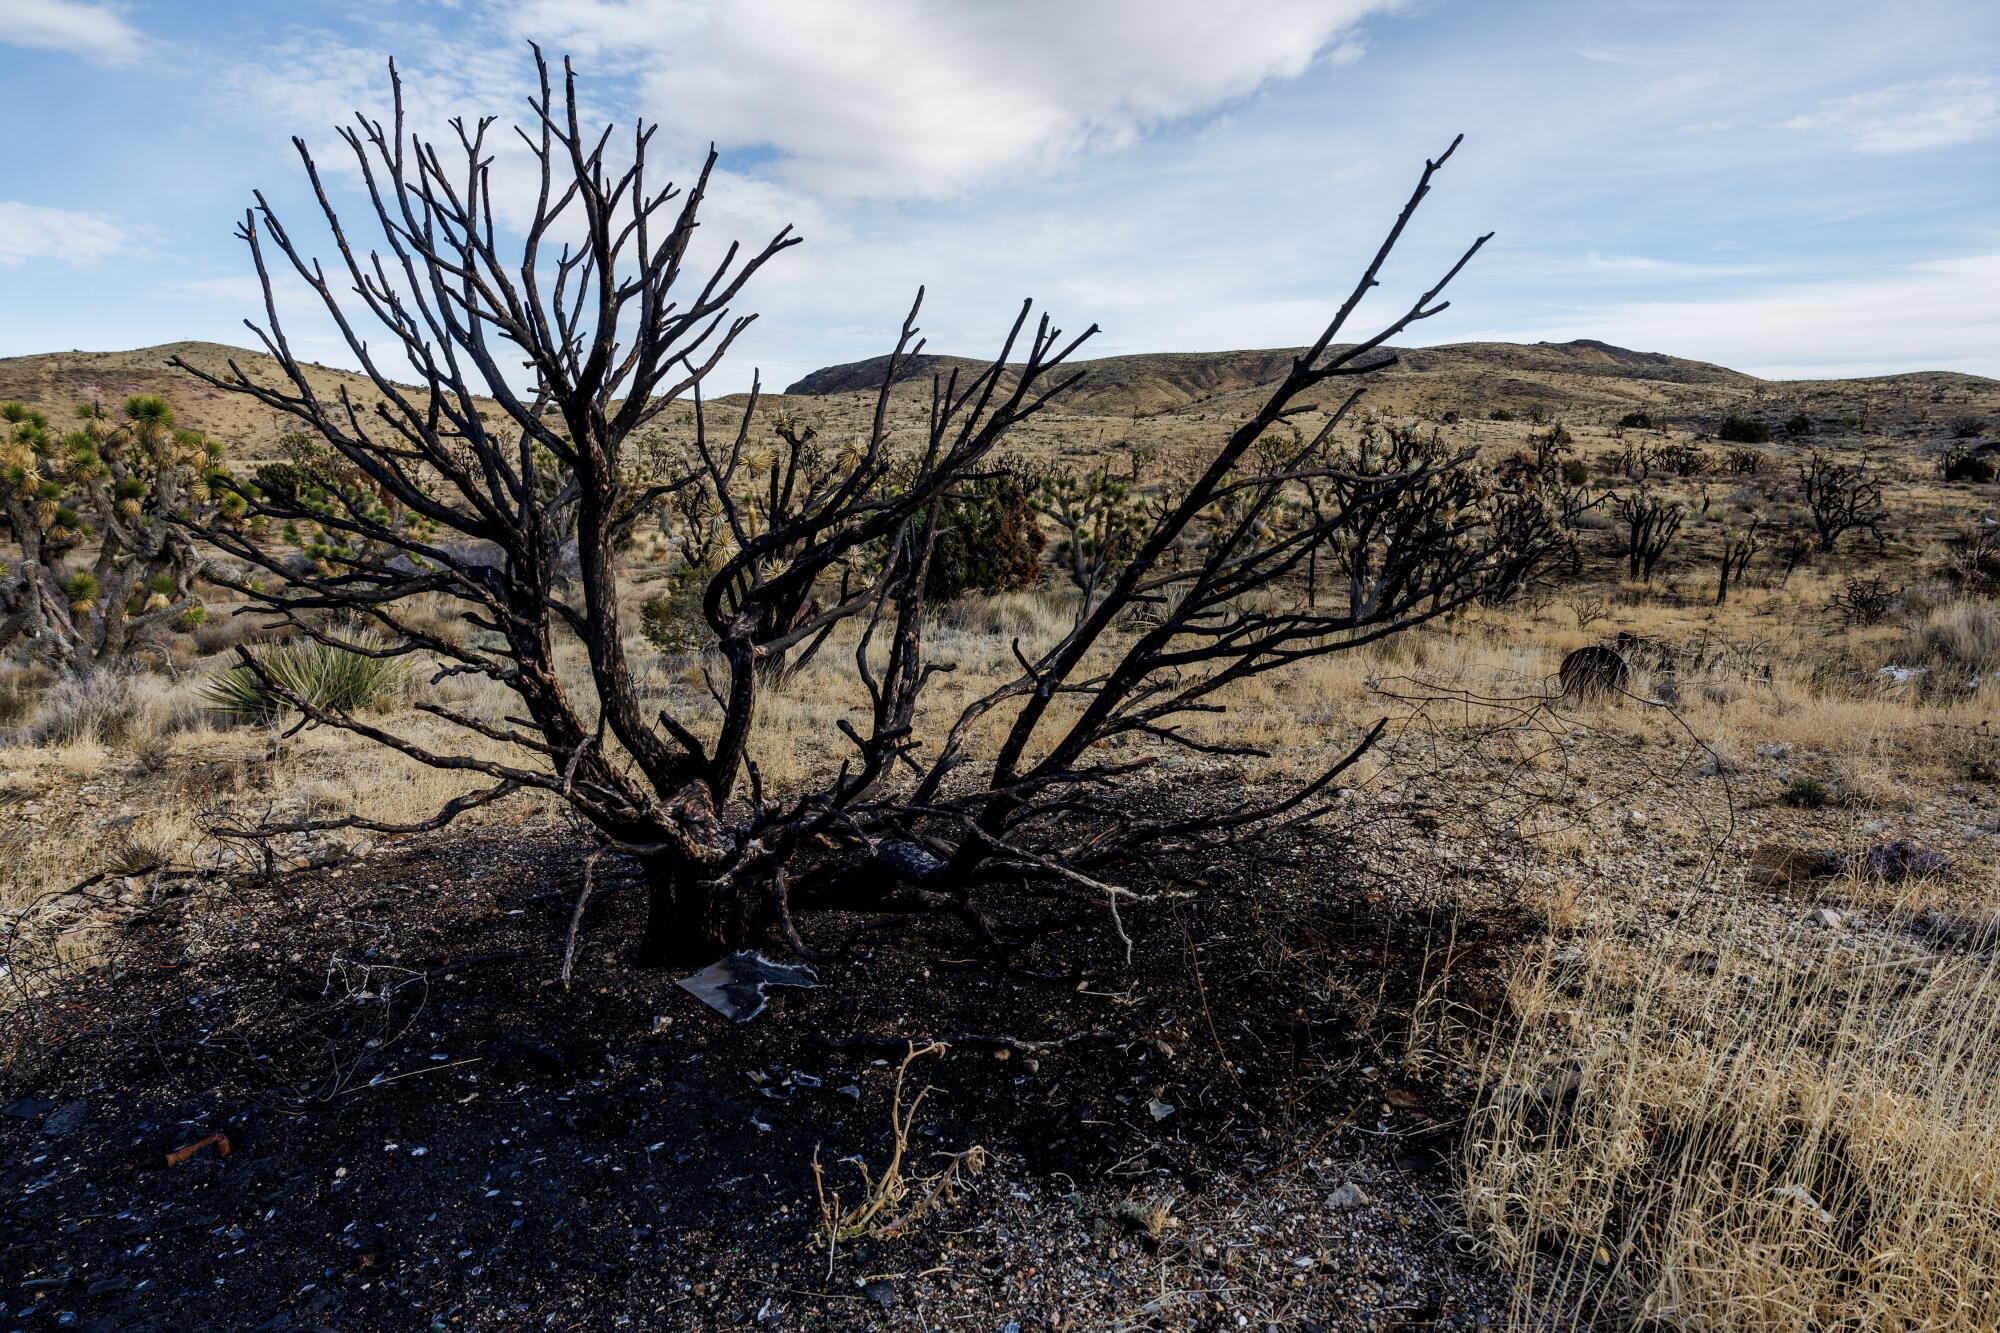 Charred vegetation rises from a patch of scorched desert.